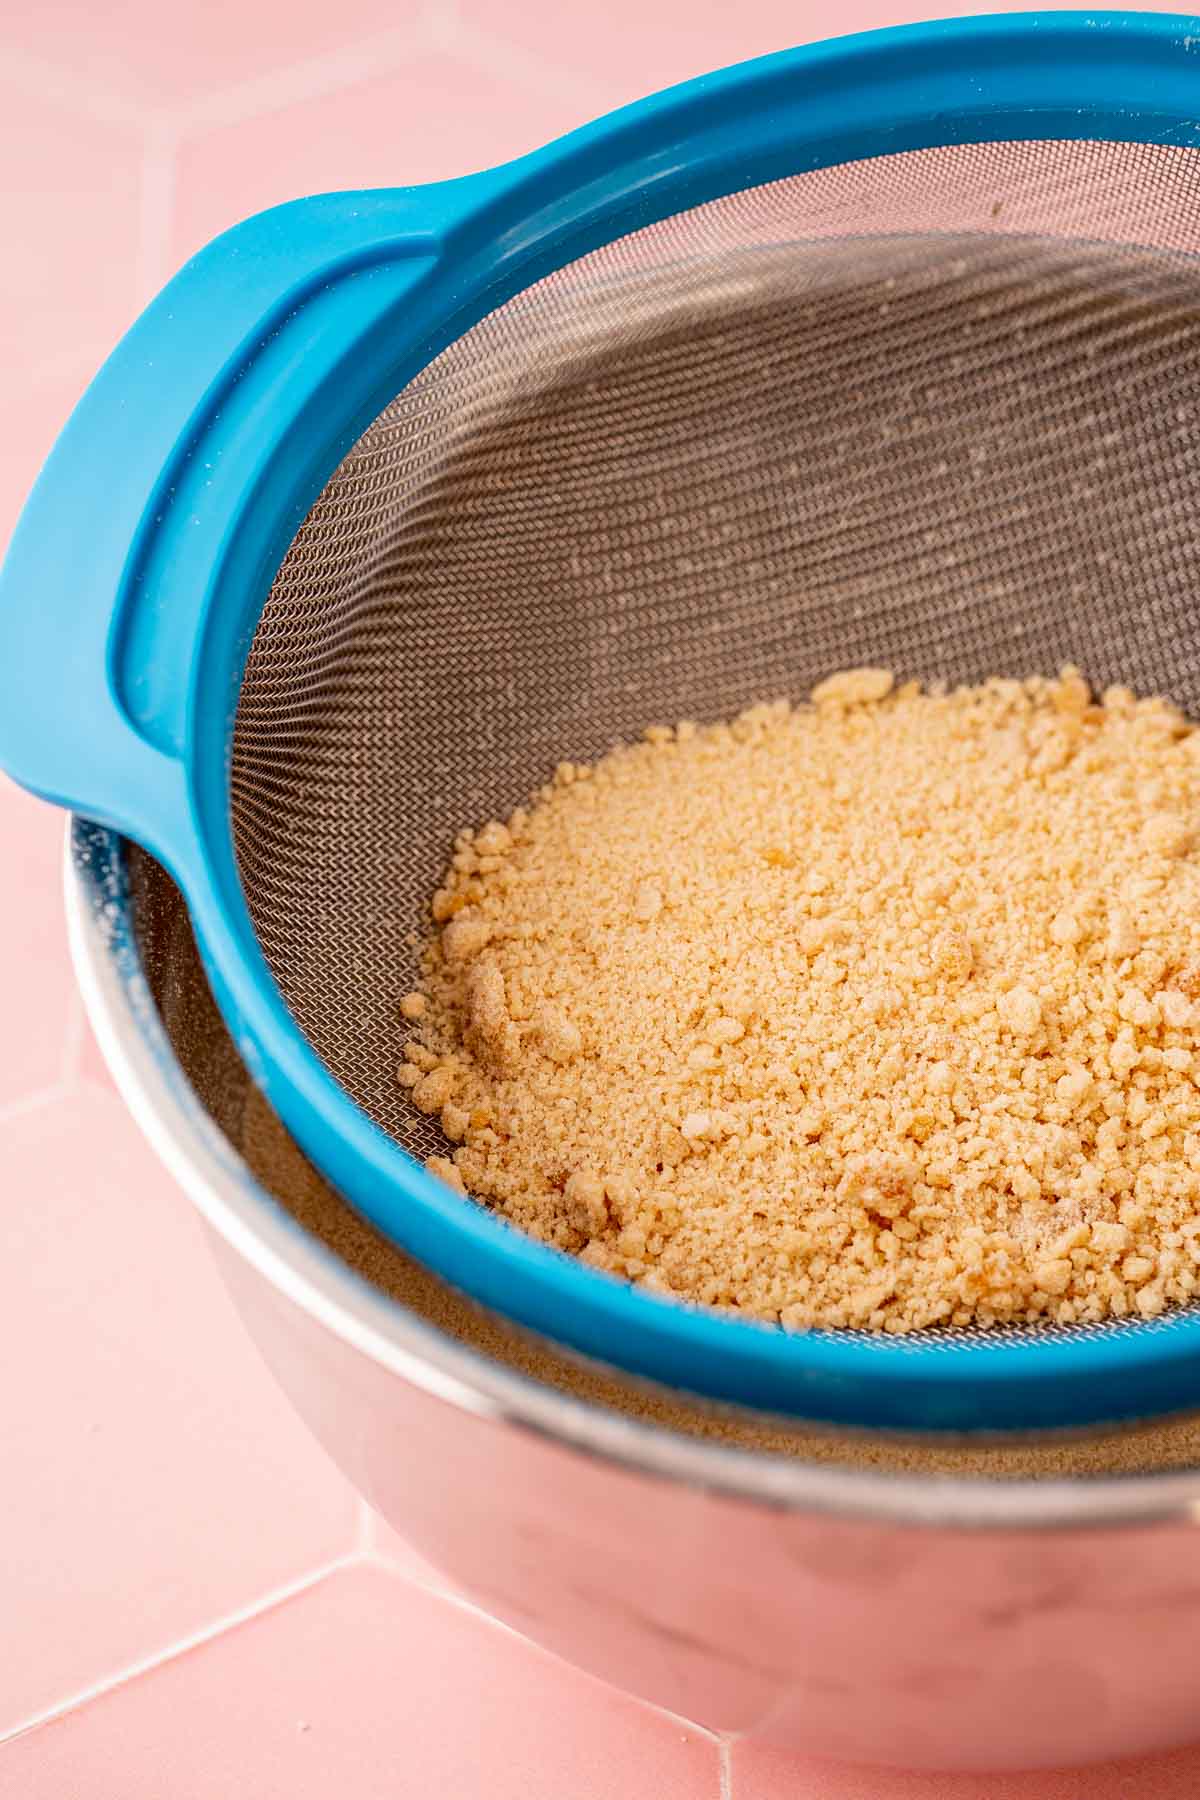 Toasted sugar being sifted into a bowl.